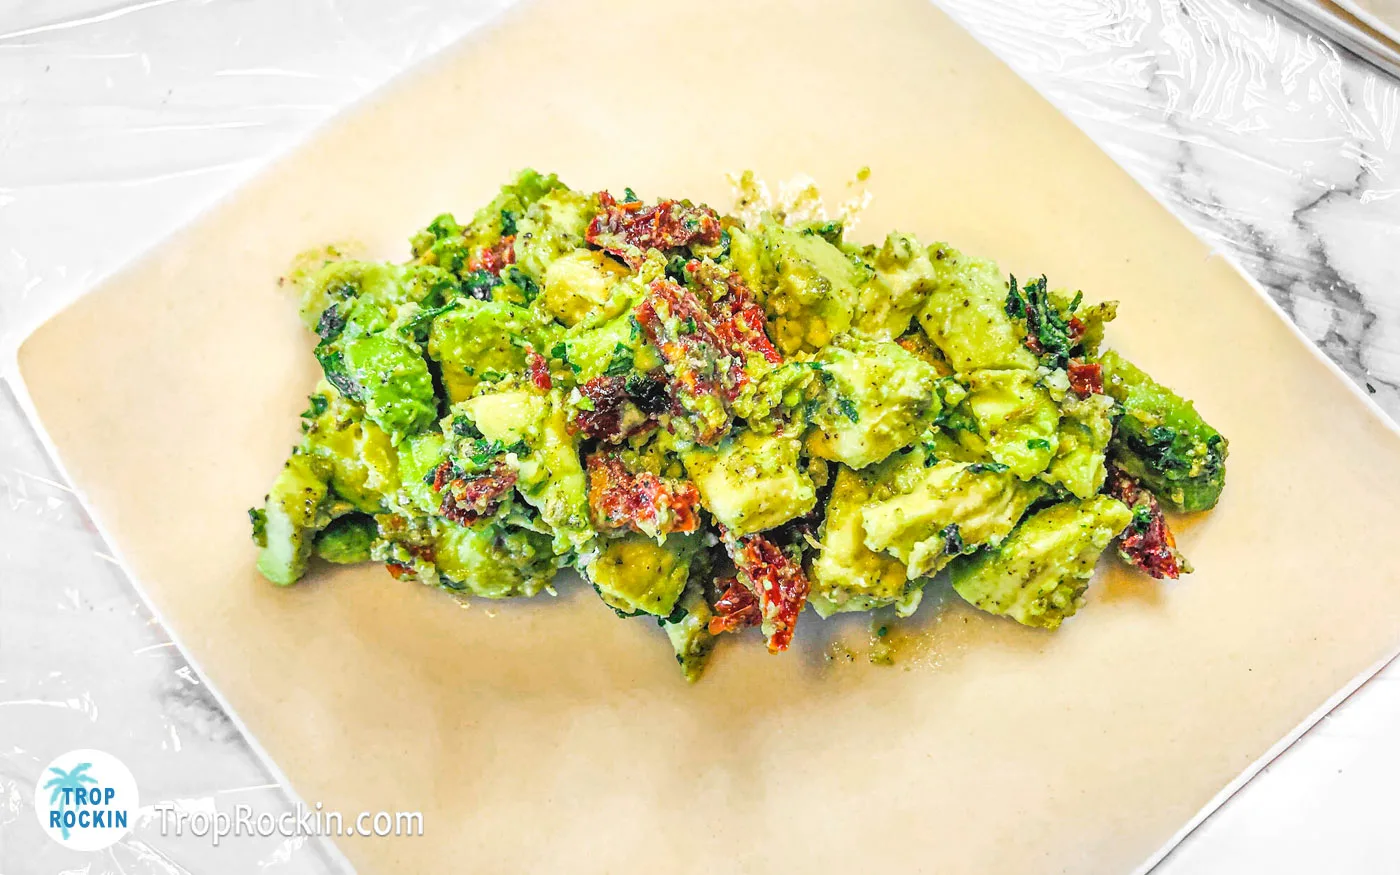 Avocado mixture on top of an egg roll wrapper in the middle.